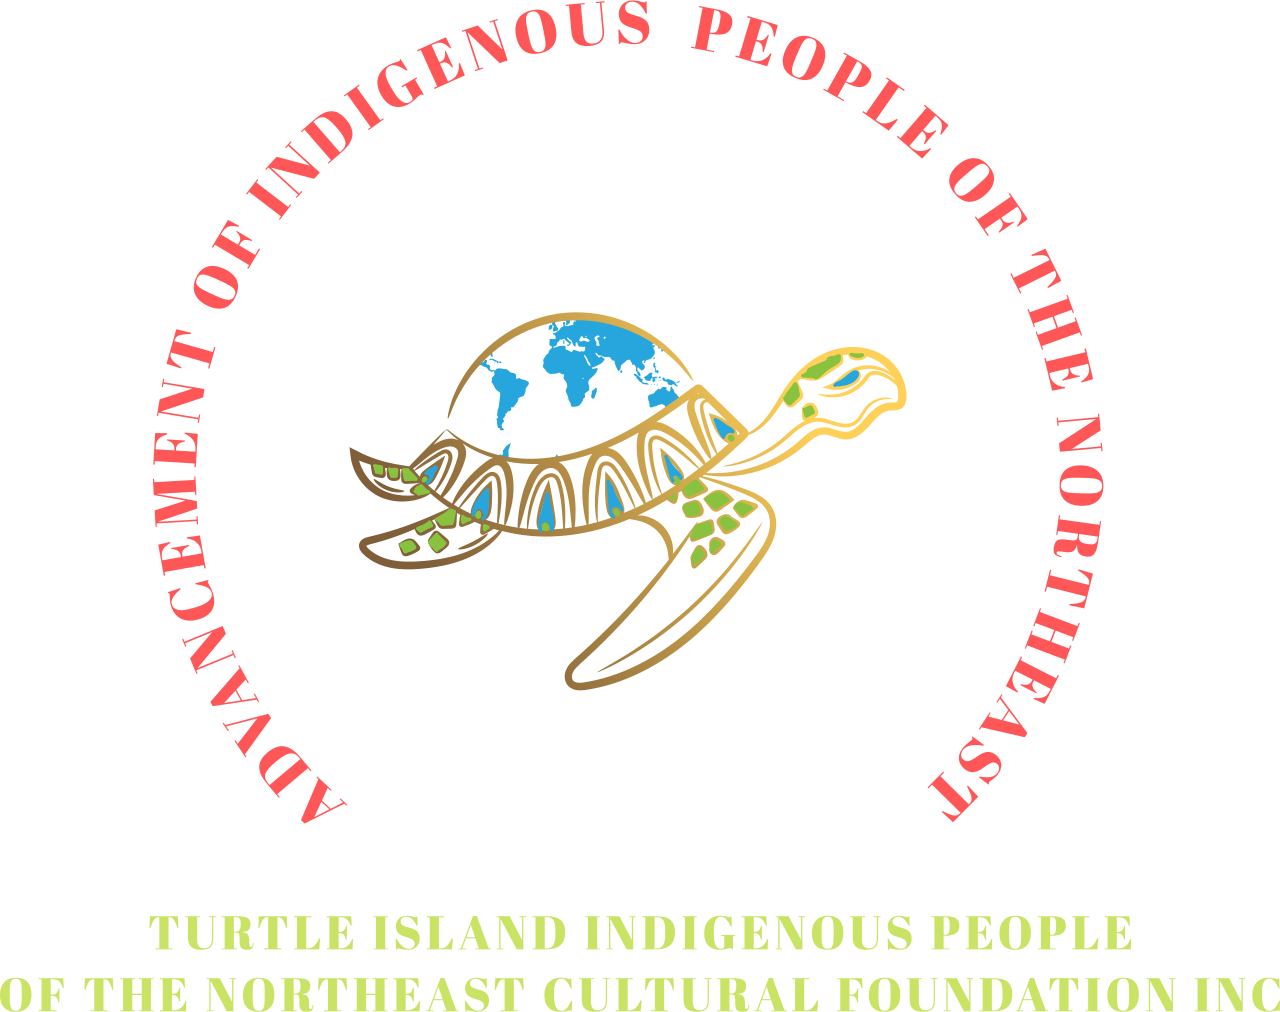 TURTLE ISLAND INDIGENOUS PEOPLE 
OF THE NORTHEAST CULTURAL FOUNDATION INC 's logo